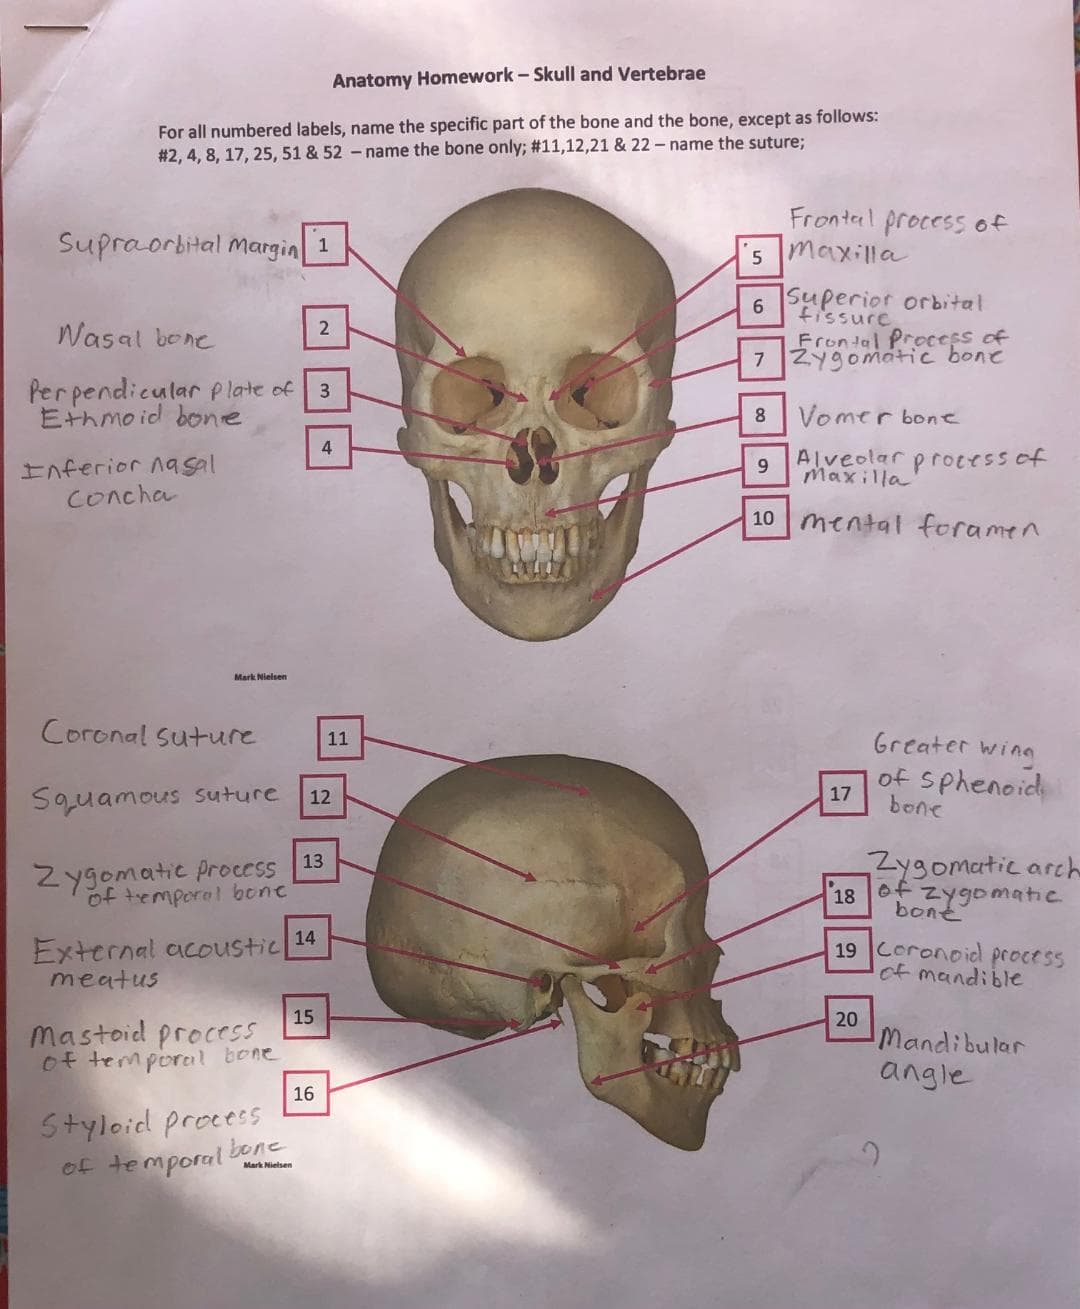 Anatomy Homework- Skull and Vertebrae
For all numbered labels, name the specific part of the bone and the bone, except as follows:
# 2, 4, 8, 17, 25, 51 & 52 - name the bone only; #11,12,21 & 22 - name the suture;
Supraorbital Margin
Fronterl process of
5 maxilla
1
6 Superior orbital
fissure
Wasal bone
Frontal Process of
7 Zygomátic bone
Per pendicular p late of
Ethmoid bone
8
Vomer bone
Alveolar processof
Inferior nasal
Concha
9.
Maxilla
10 mental foramen
Mark Nielsen
Coronal Suture
Greater wing
11
of Sphenoid
bone
17
Squamous suture
12
Zygomatic process 13
of temporal bone
Zygomatic arch
Zygomatic
of
bont
18
External acoustic 14
meatus
19 Coronoidl process
of mandible
15
mastoid process
of temporal bone
20
Mandibular
angle
16
Styloid process
of temporal bene
Mark Nielsen
